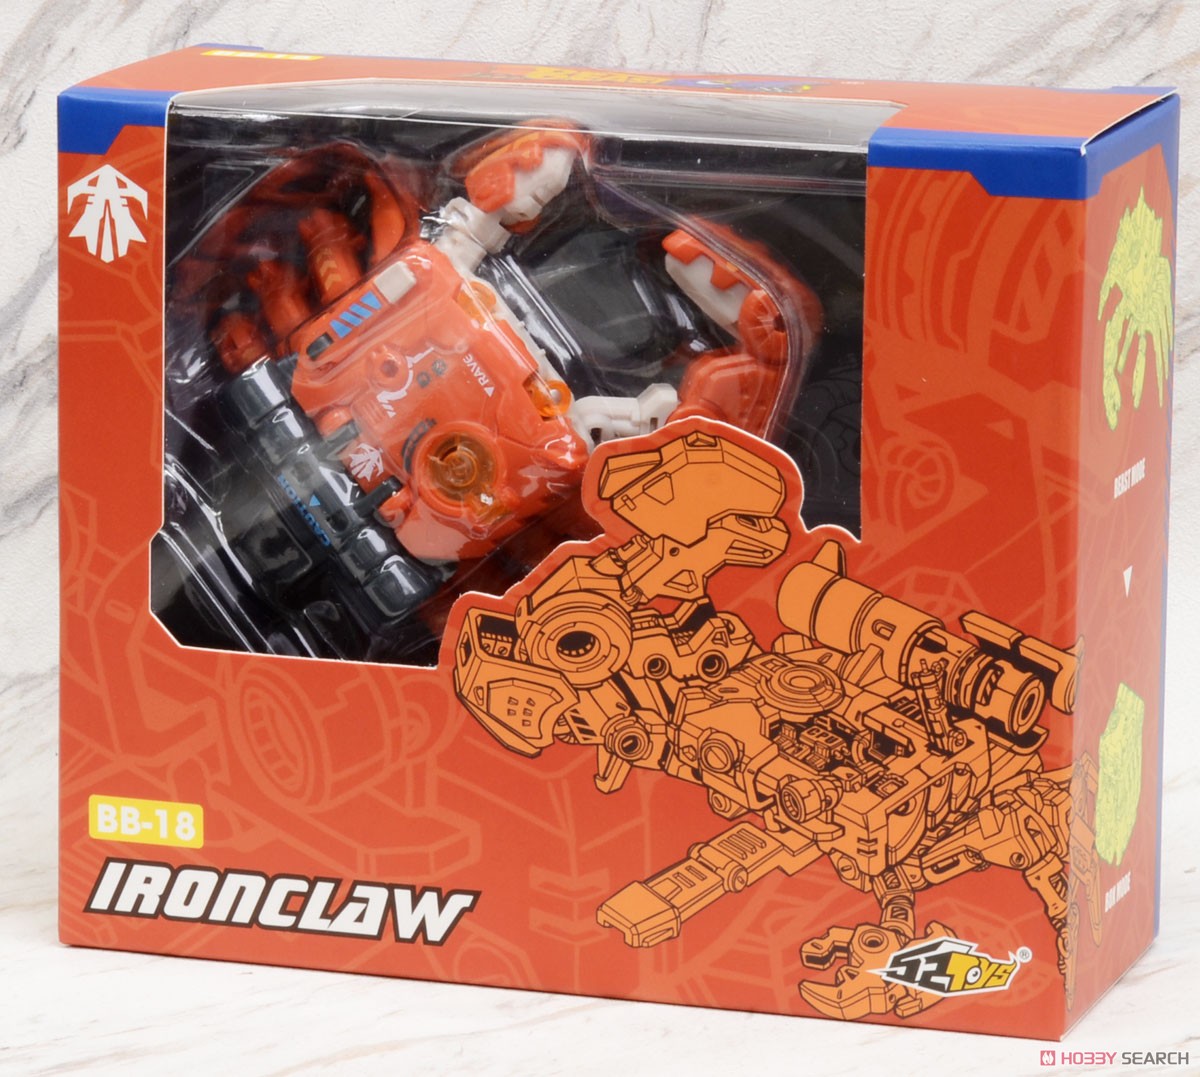 BeastBOX BB-18 Ironclaw (Character Toy) Package1